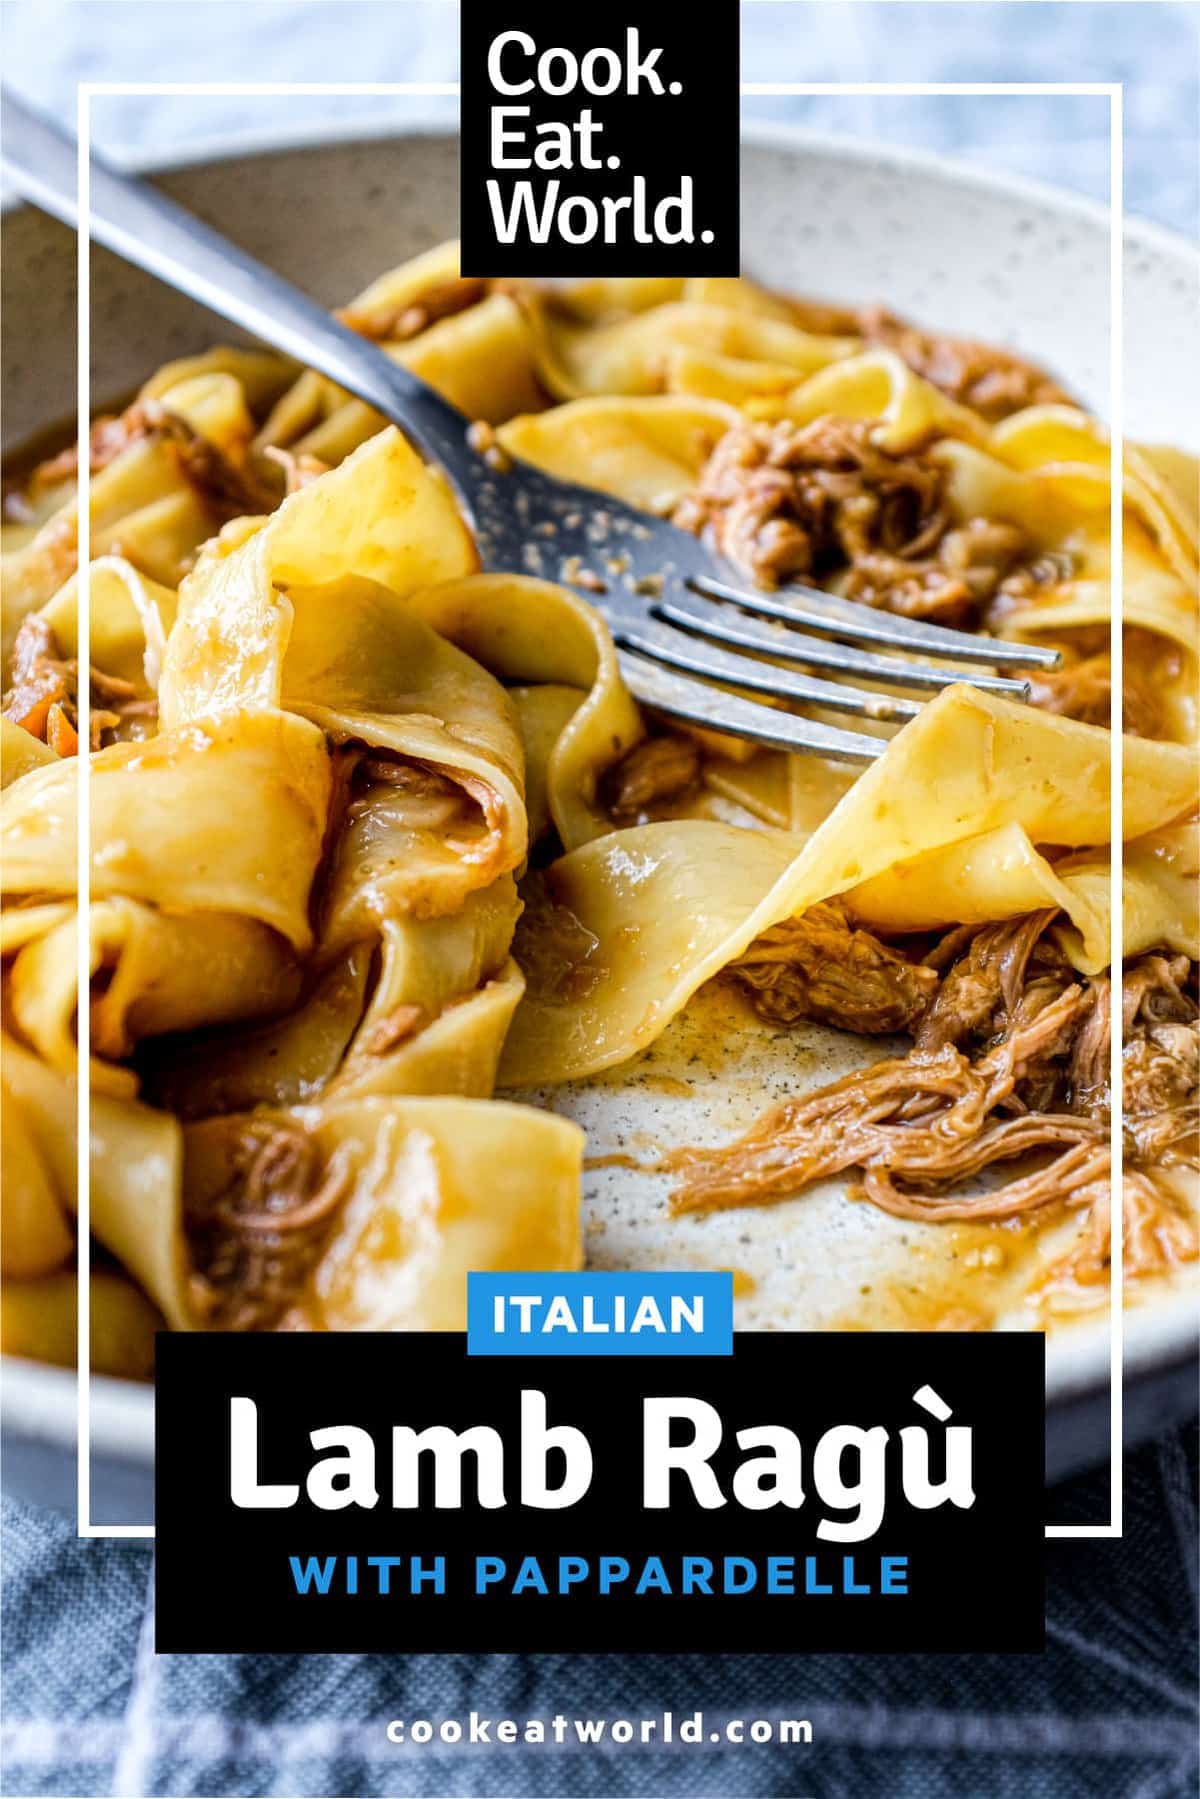 A bowl of pappardelle pasta with a lamb ragu sauce with a fork